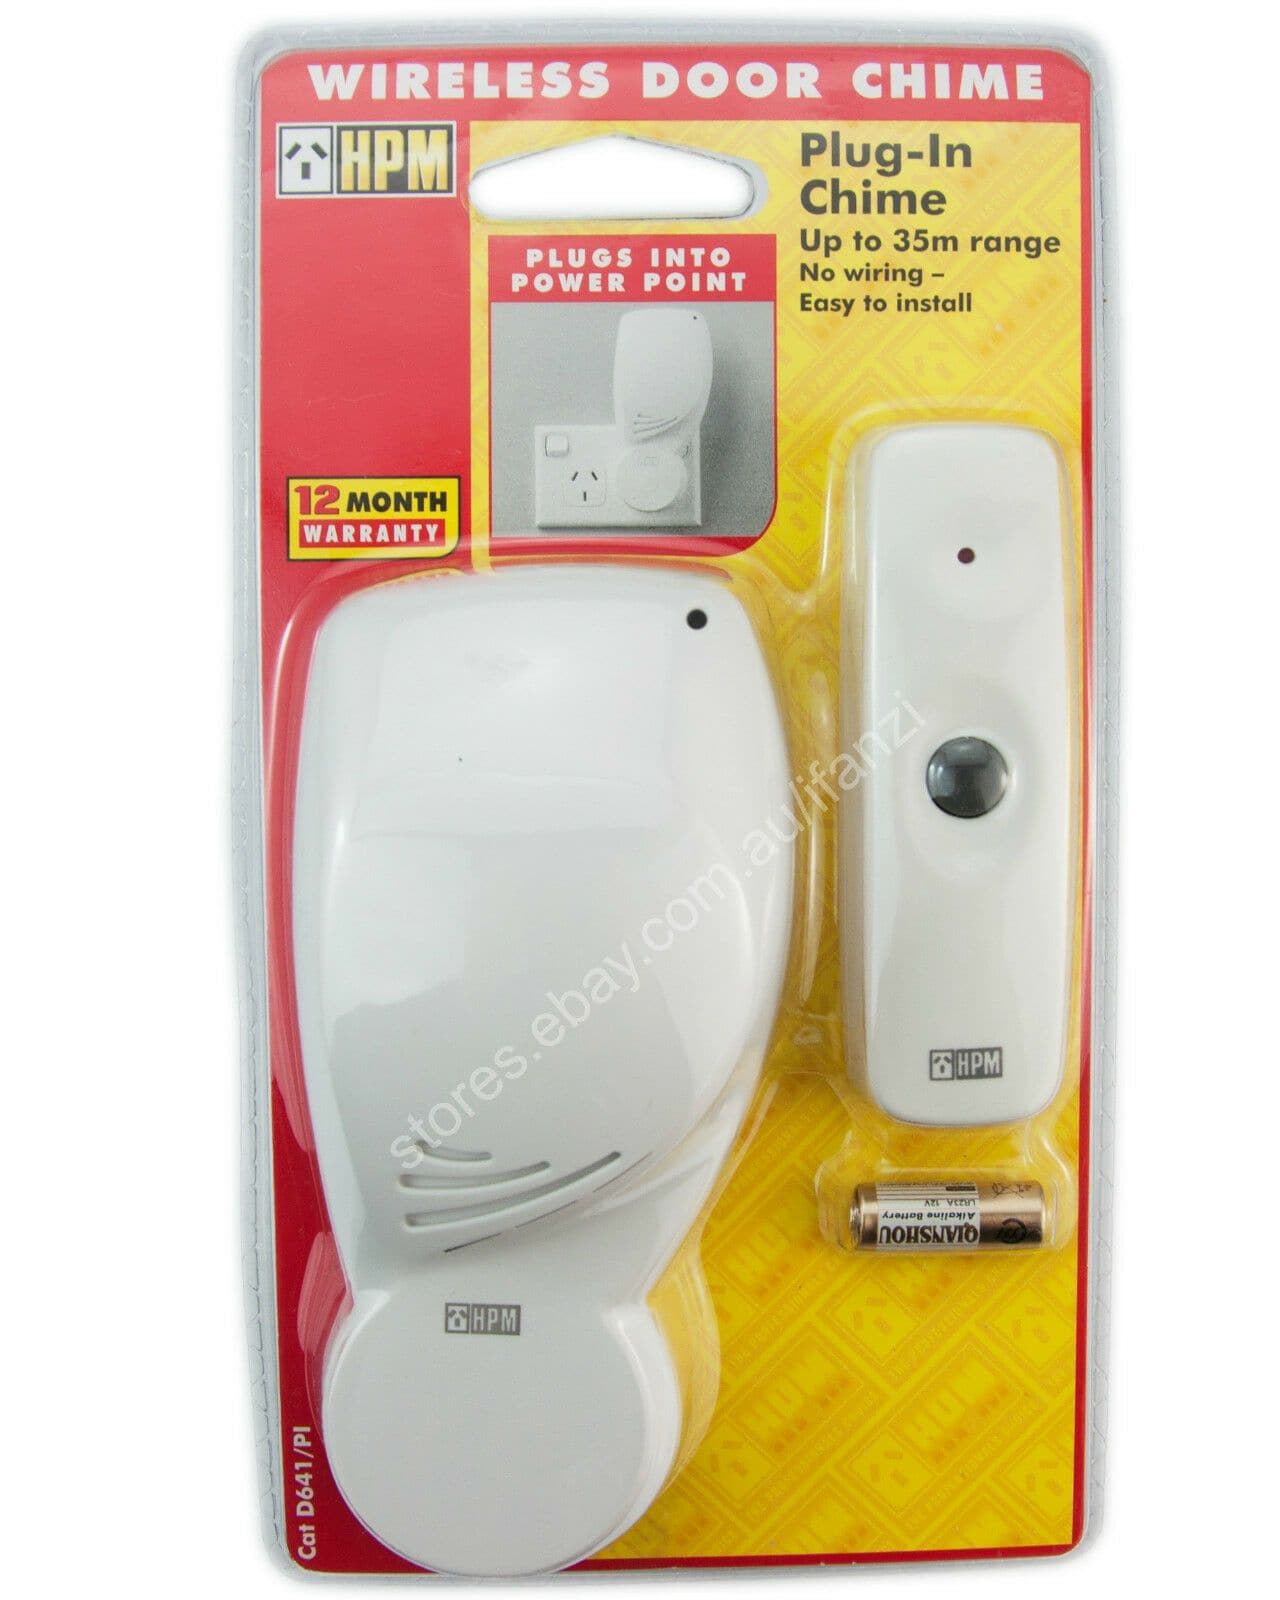 HPM Power Operated Plug In Wireless Door Chime Up to 35 metres Range D641/PI - Double Bay Hardware